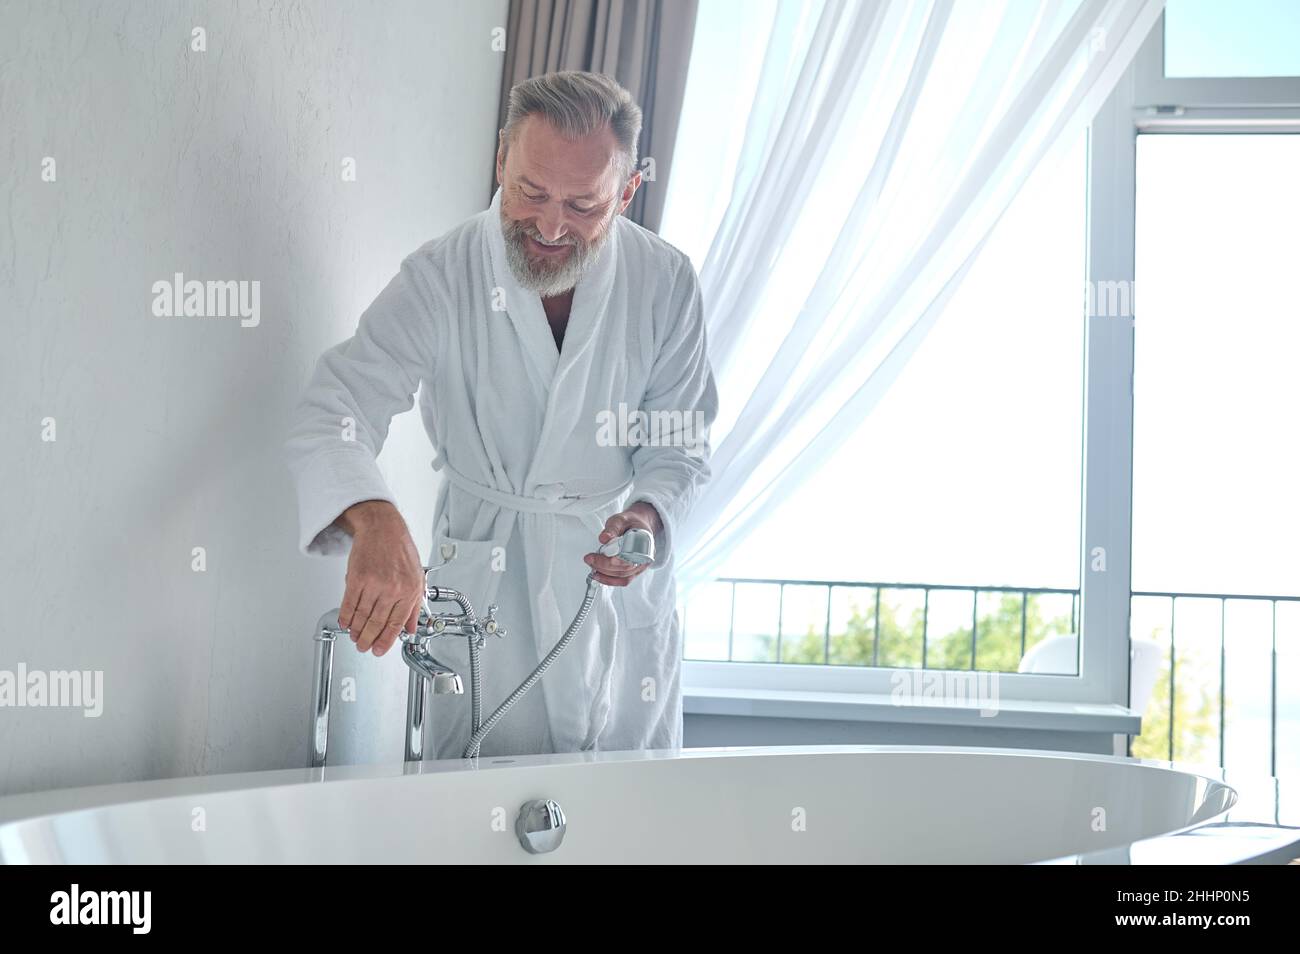 Smiling contented mature male filling the bath with water Stock Photo